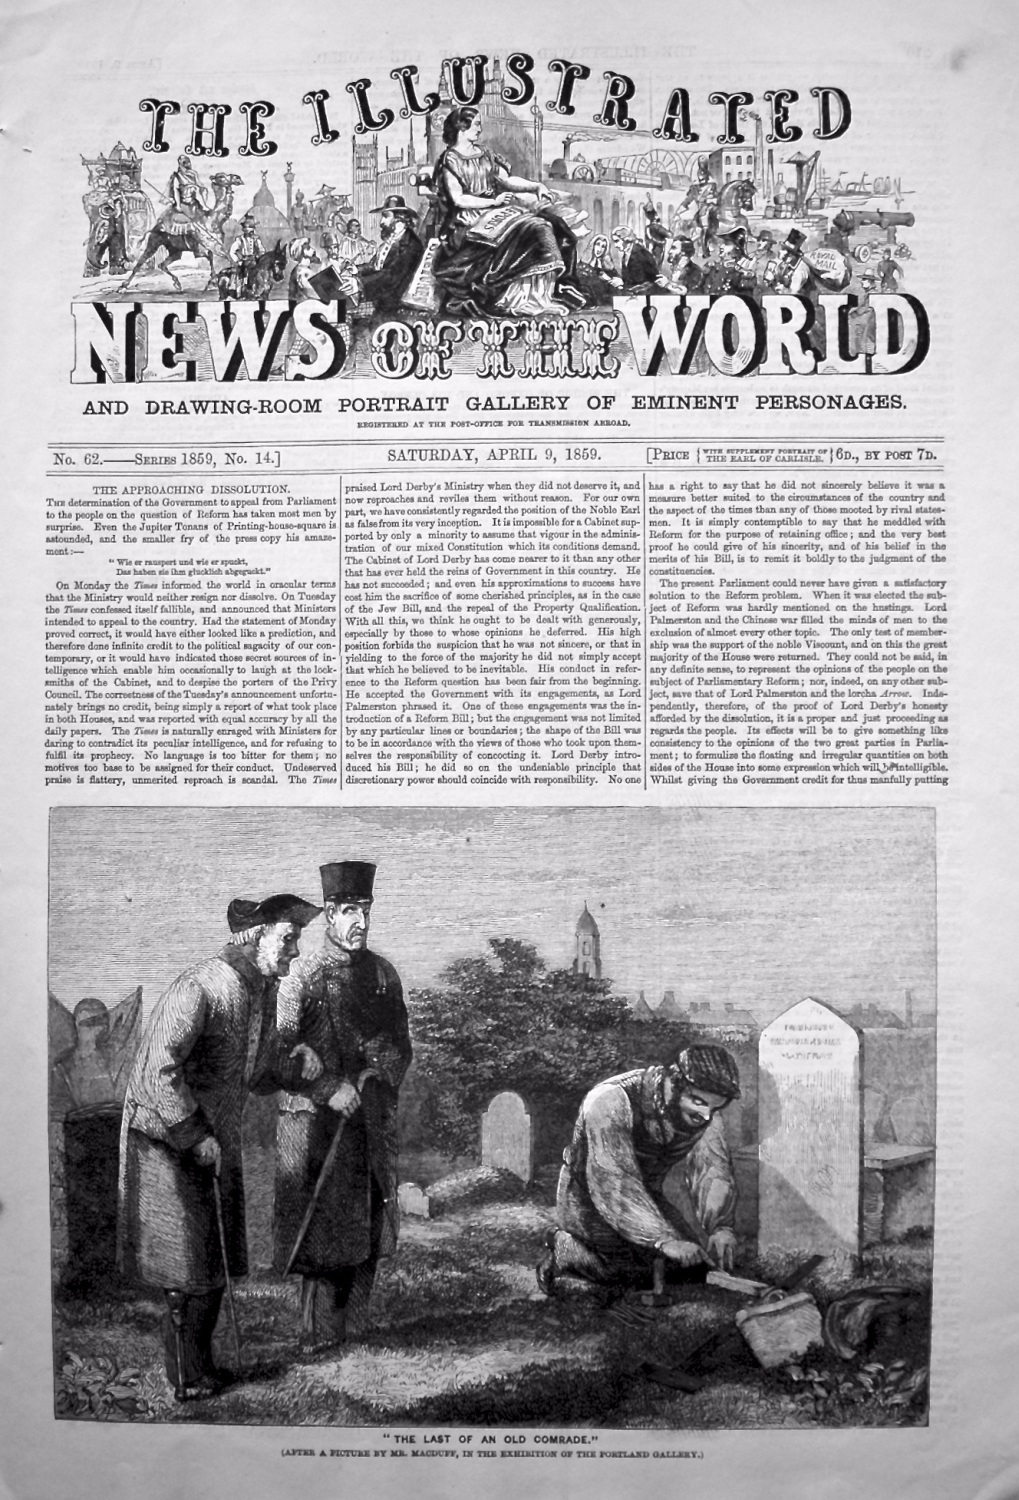 The Illustrated News of the World, April 9th, 1859.